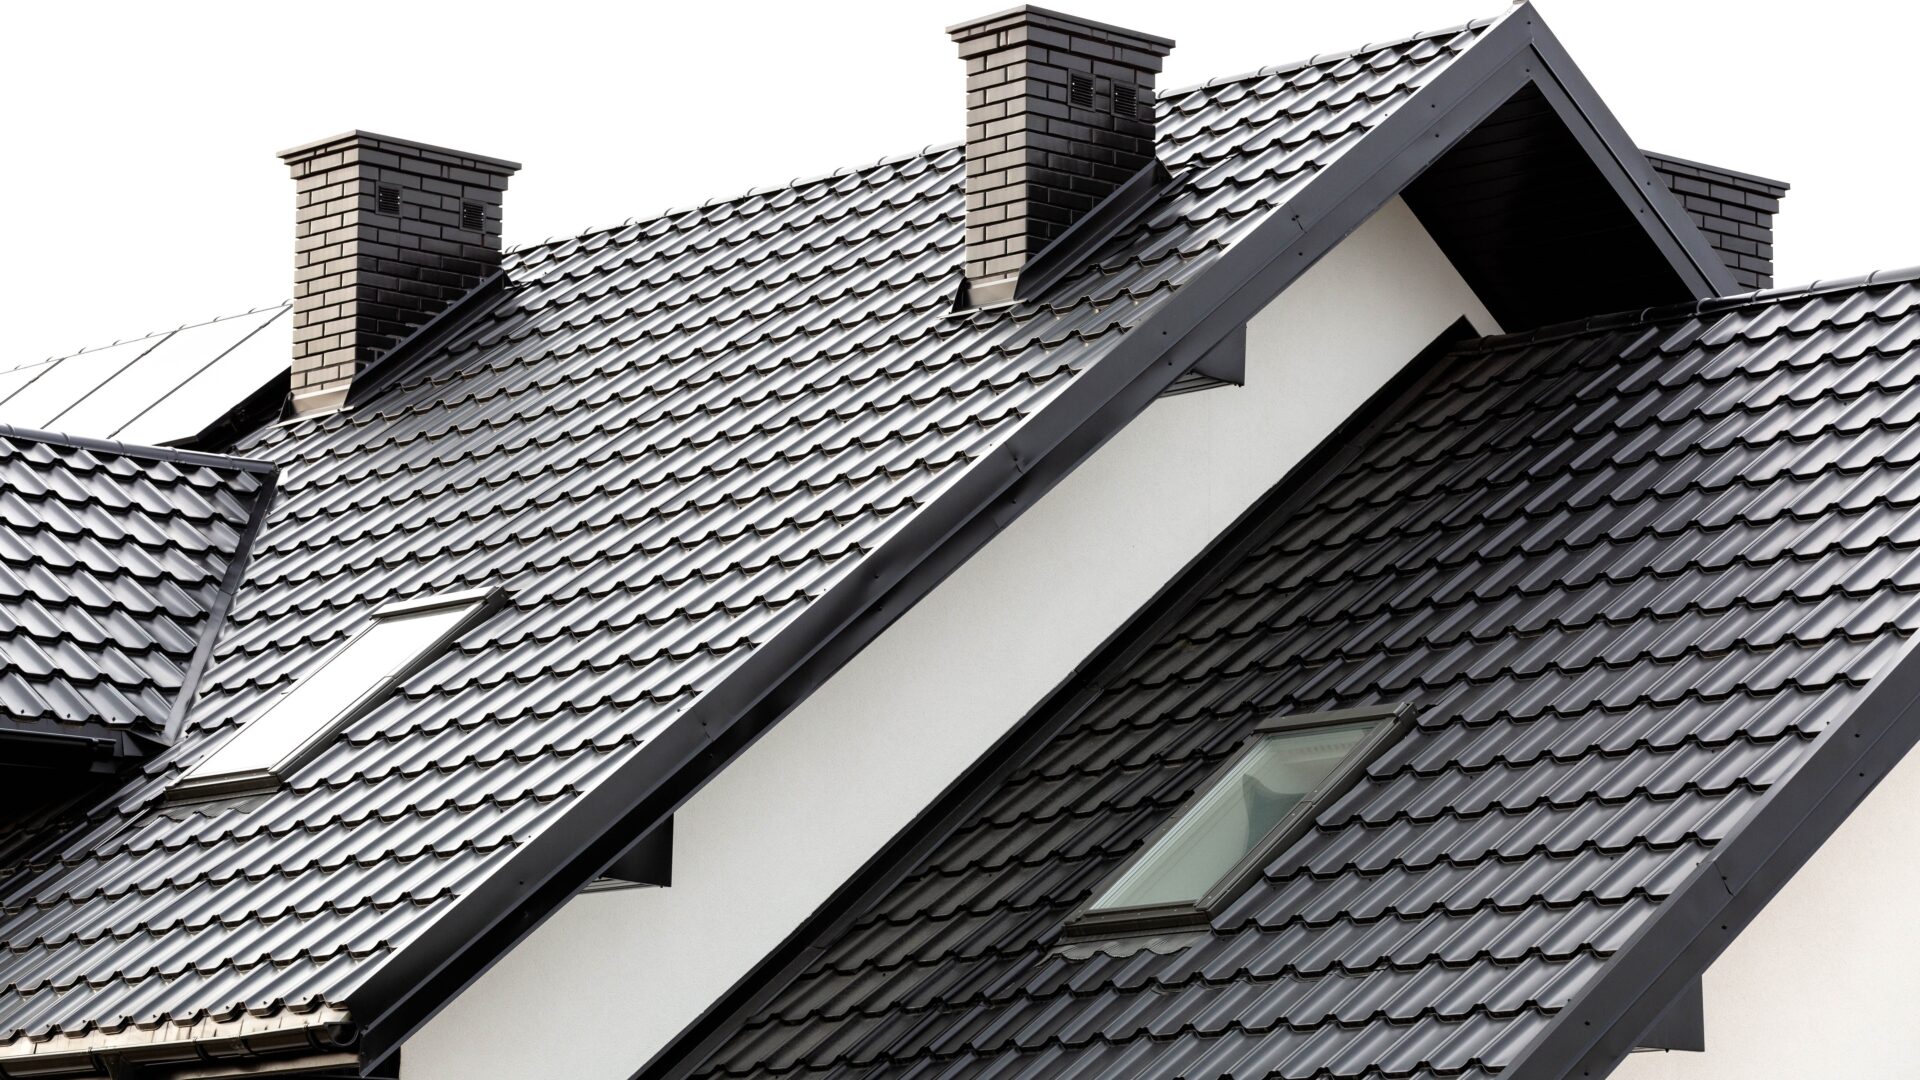 A black metal roof with a skylight and two chimneys